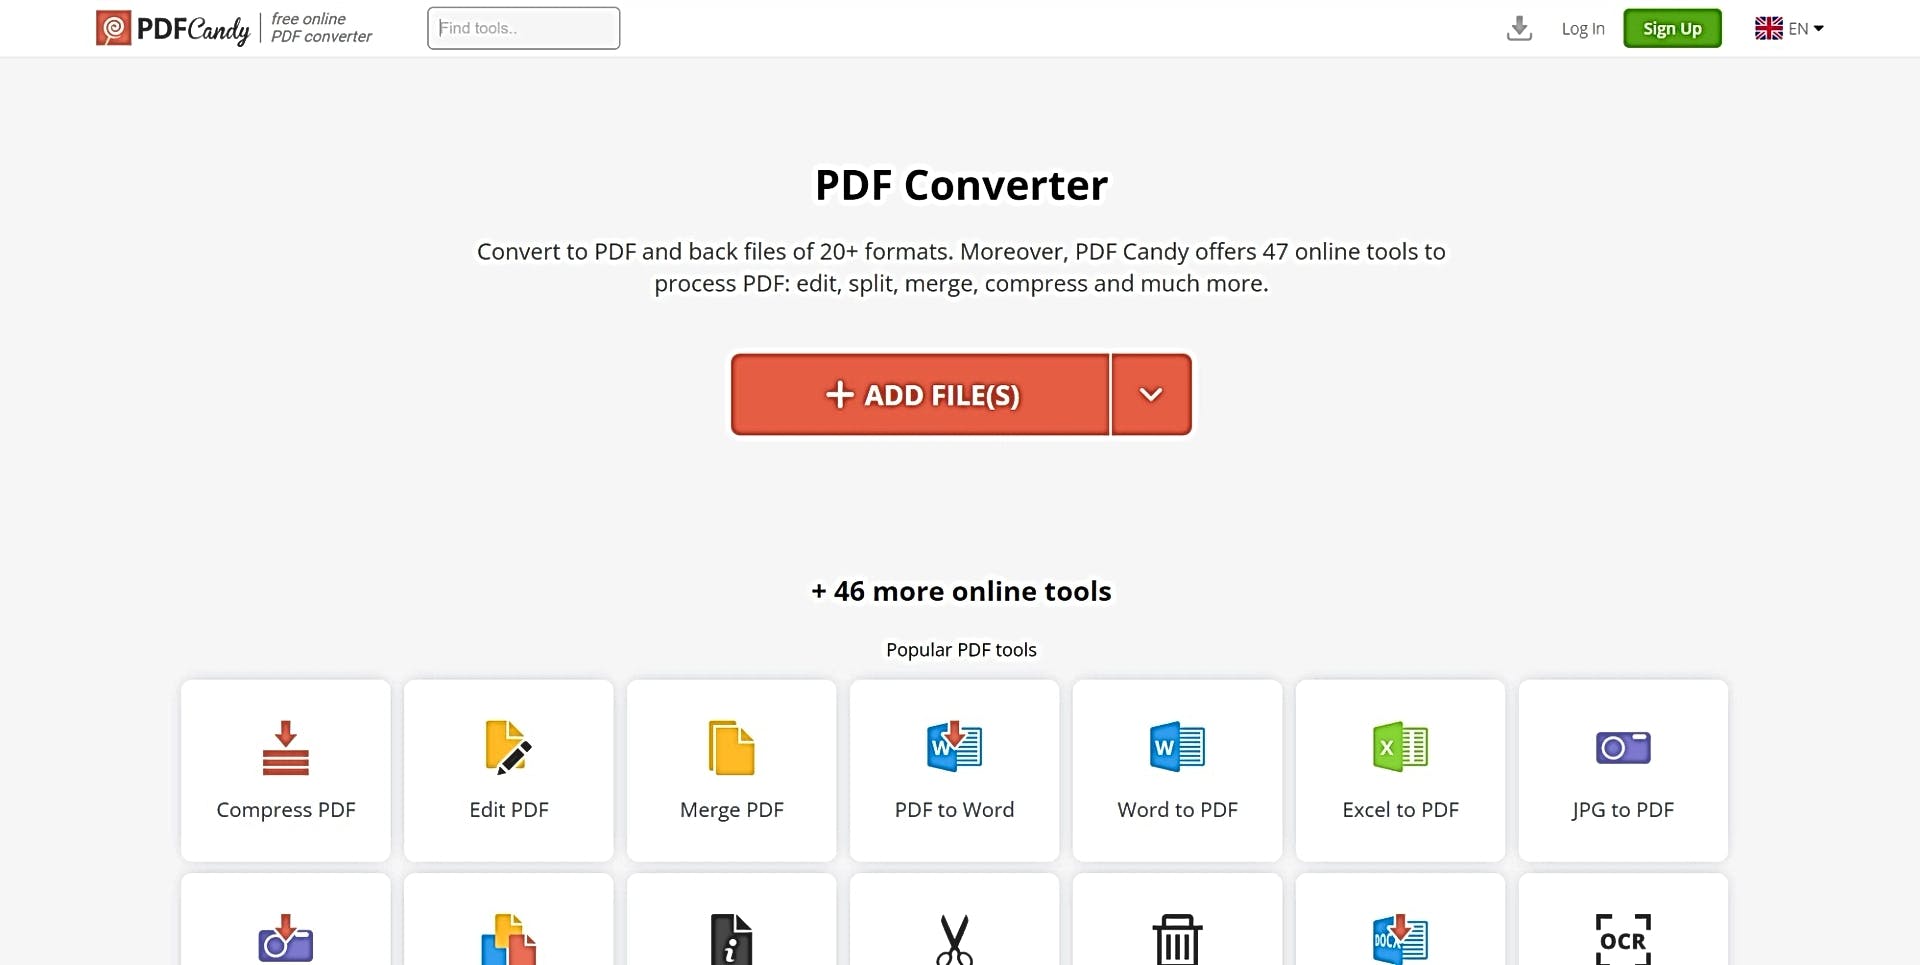 PDF Candy featured